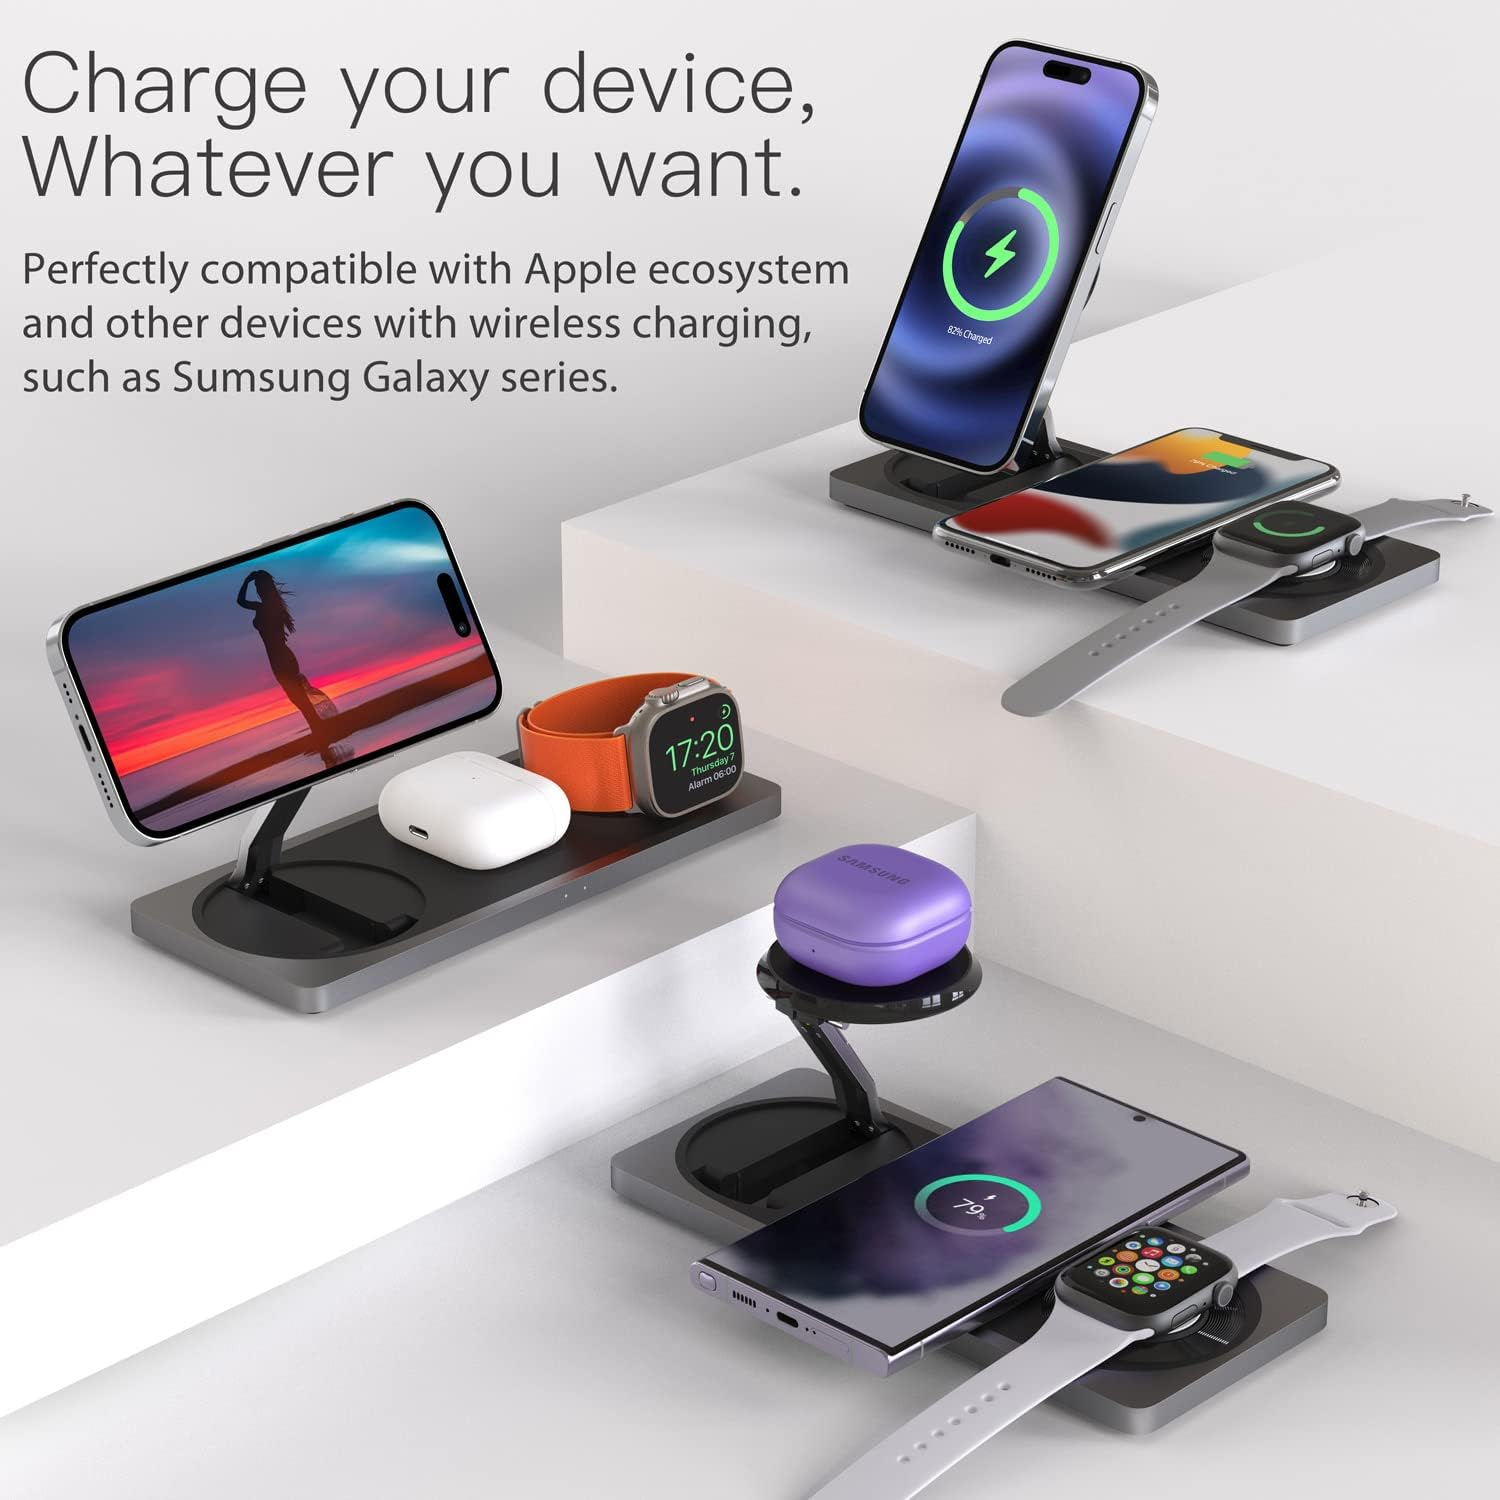 PETINO 3 in 1 Charging Station: Best Charging Pads for Multi-Device